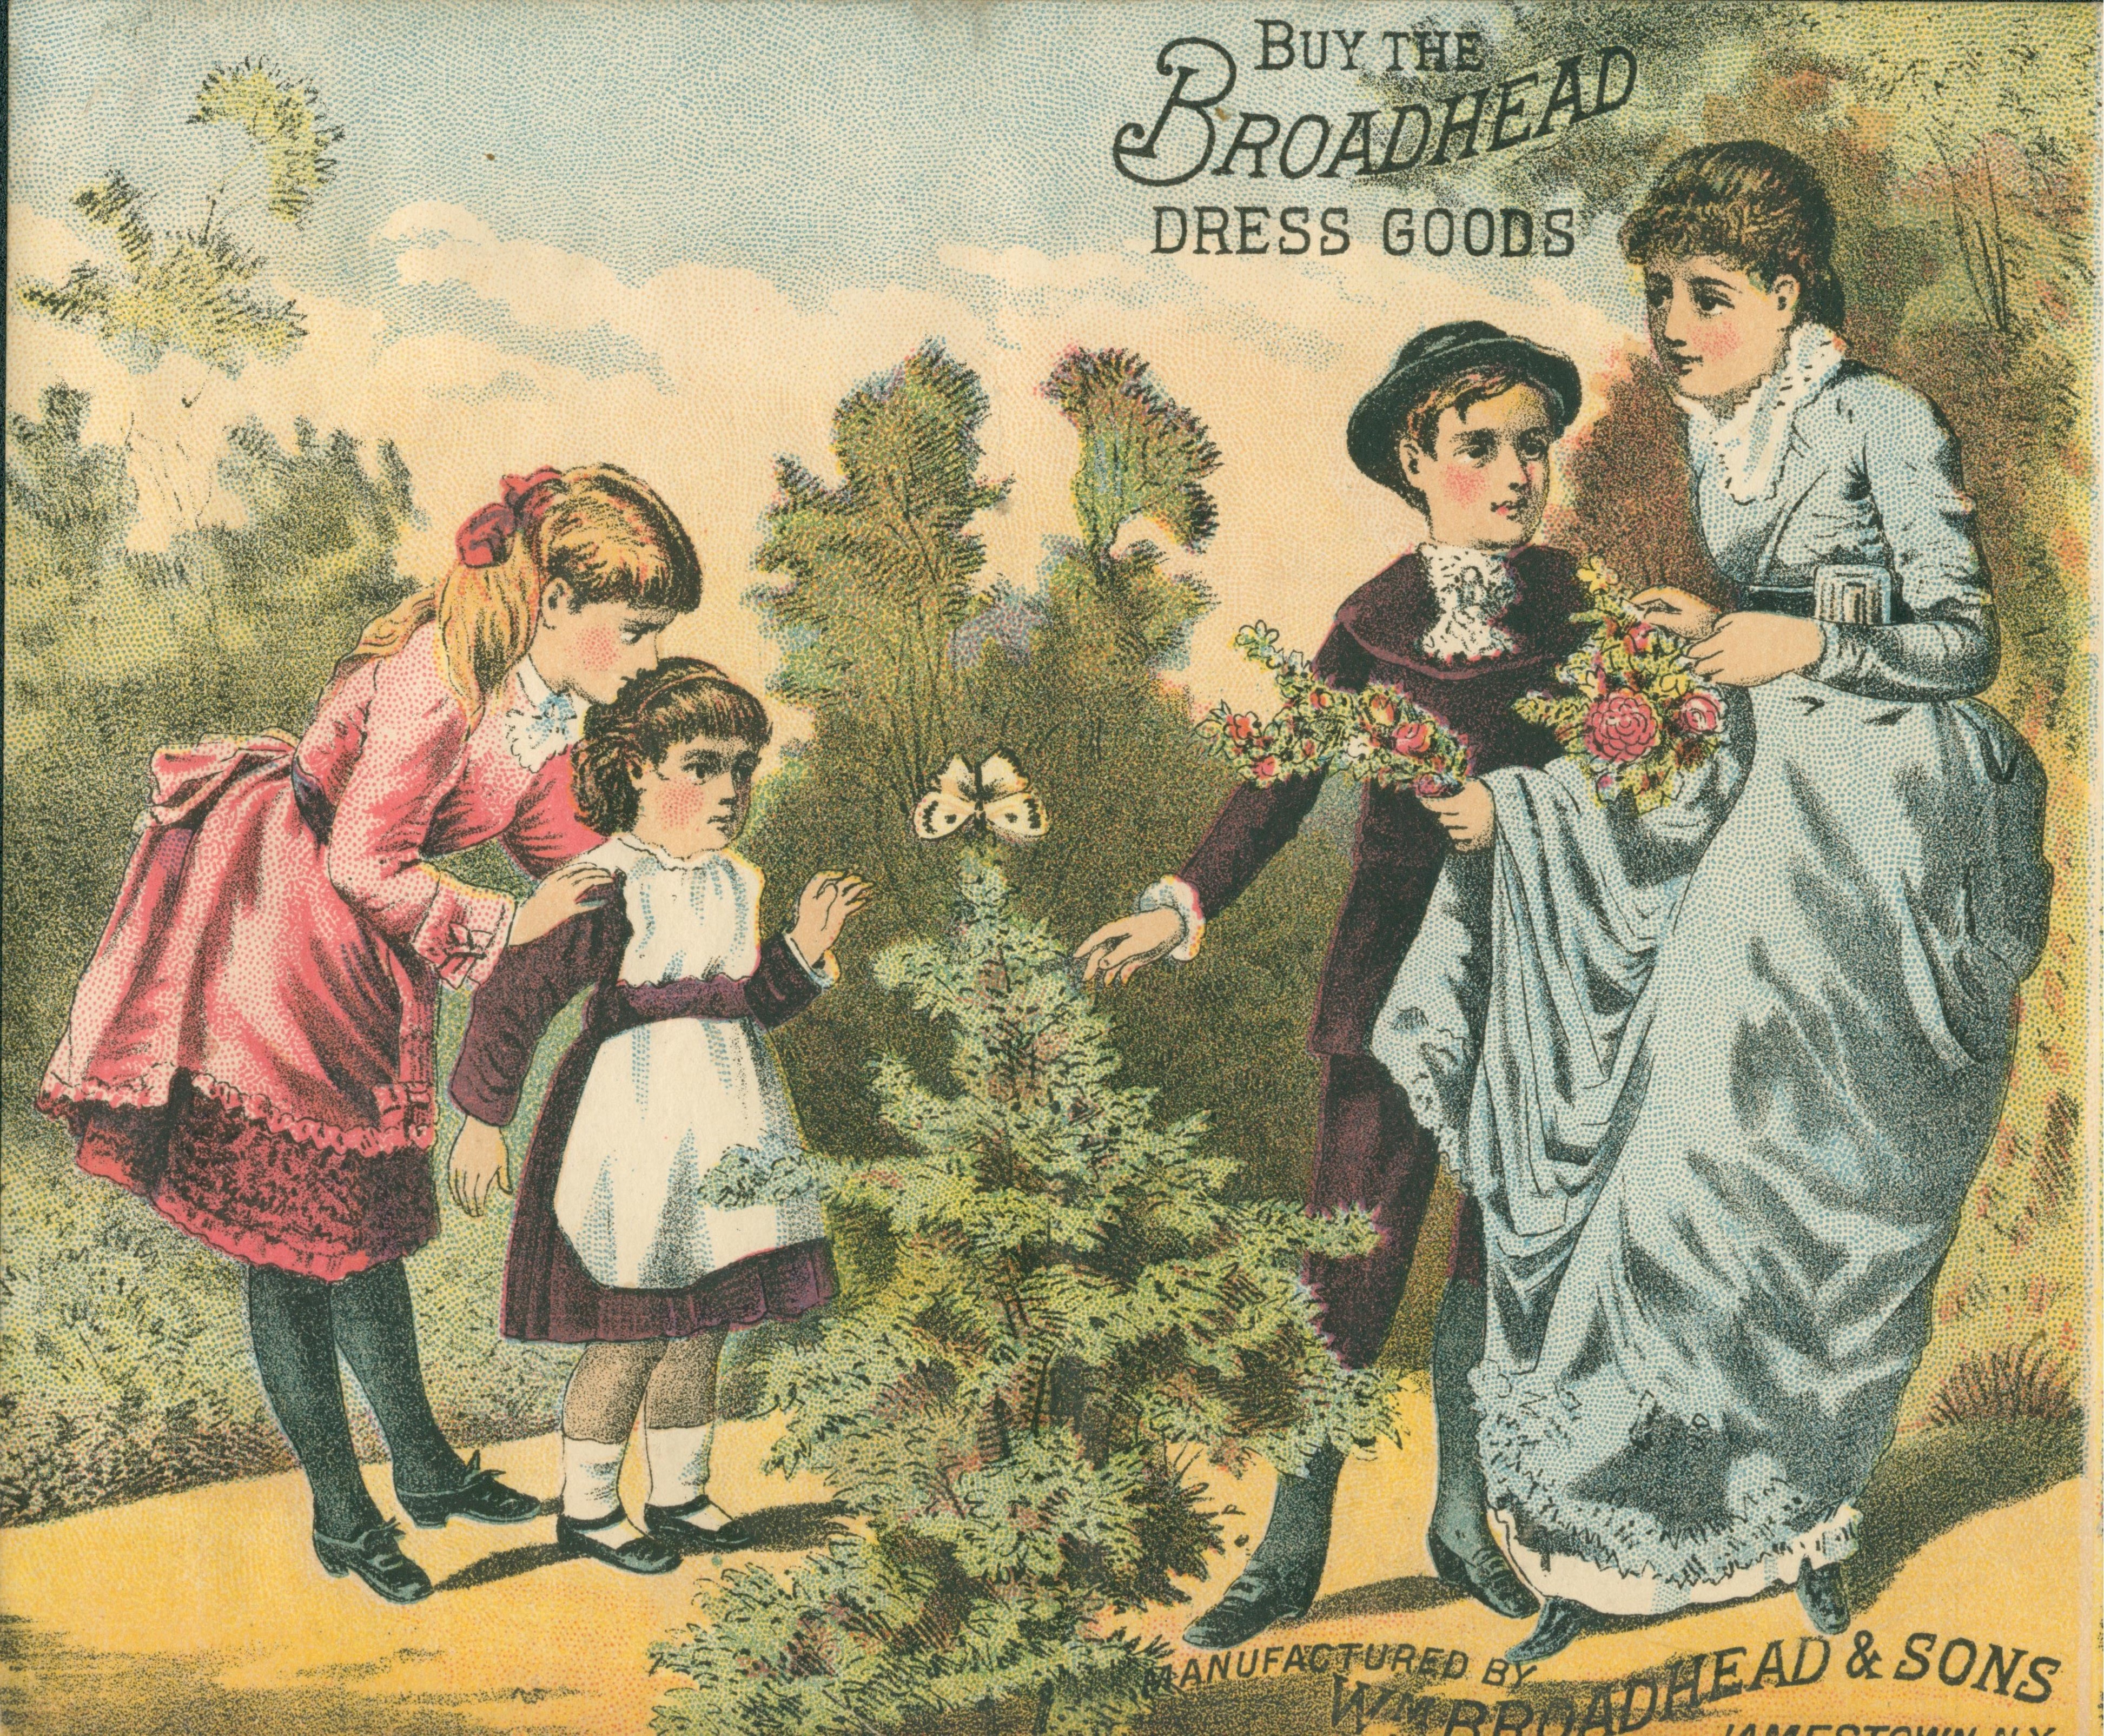 This trade card shows an adult woman and three children clustered around a small evergreen tree.